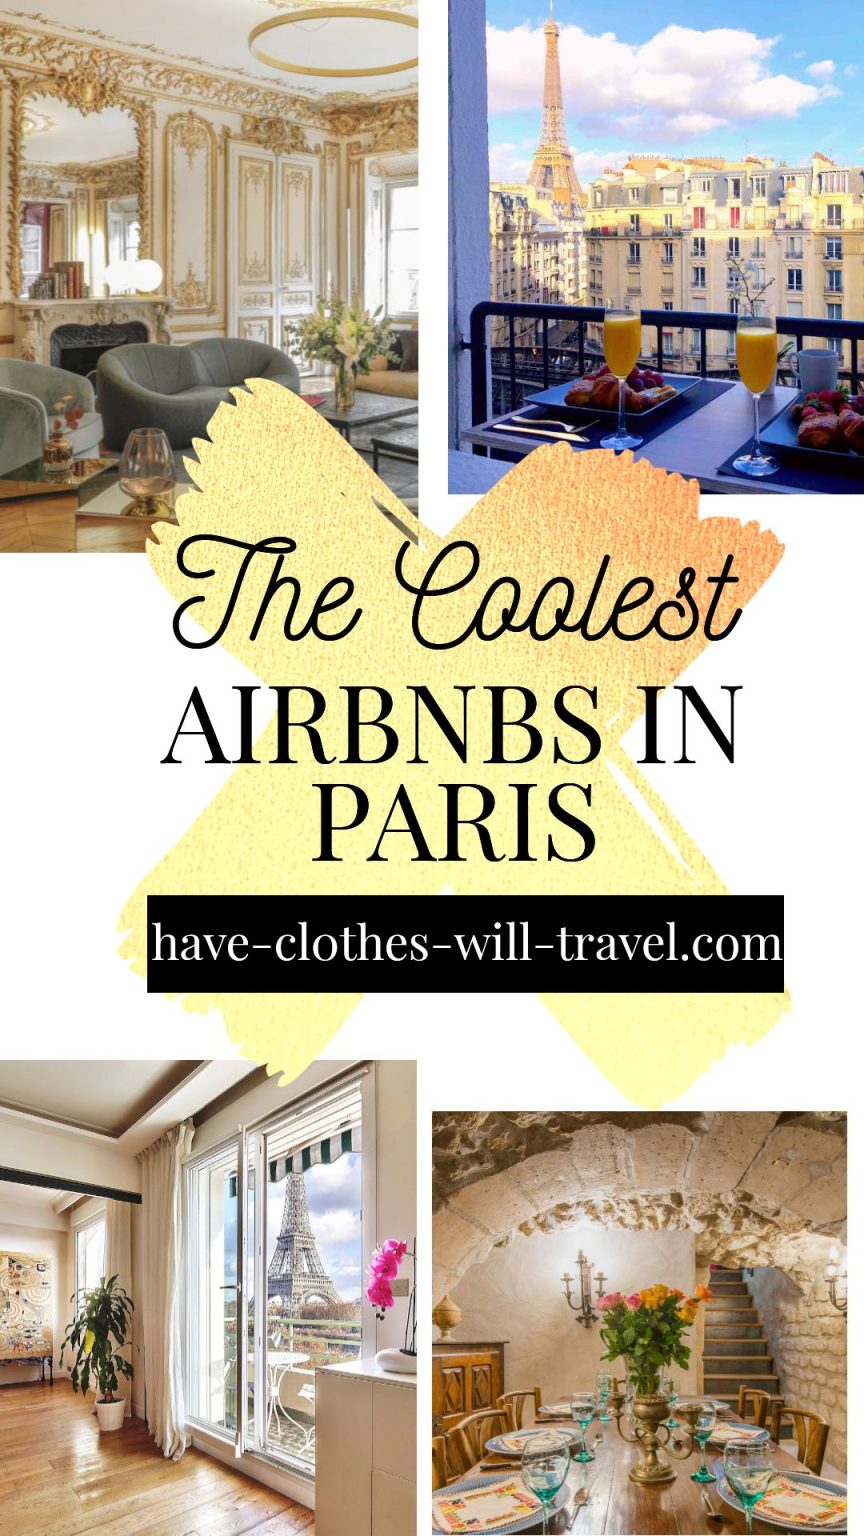 The Coolest Airbnbs in Paris With Eiffel Tower Views & More!